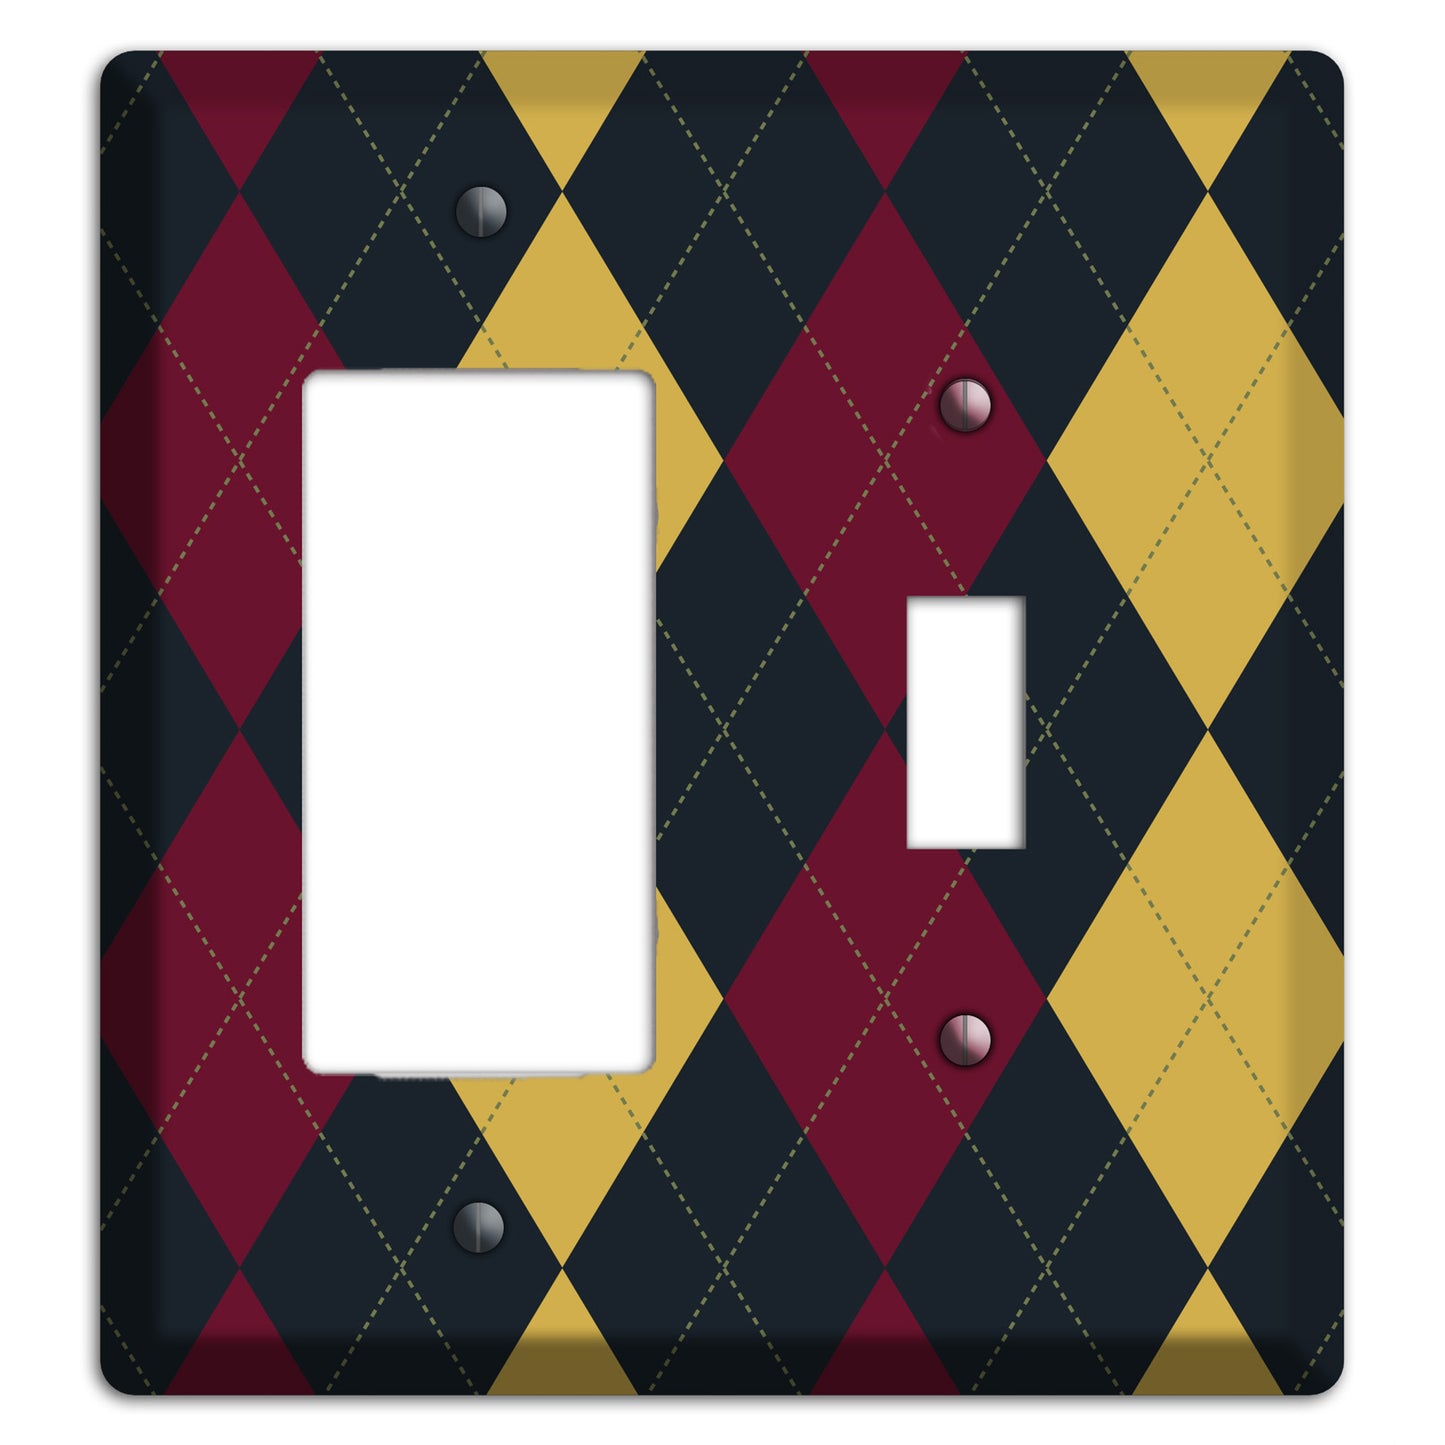 Deep Red and Yellow Argyle Rocker / Toggle Wallplate